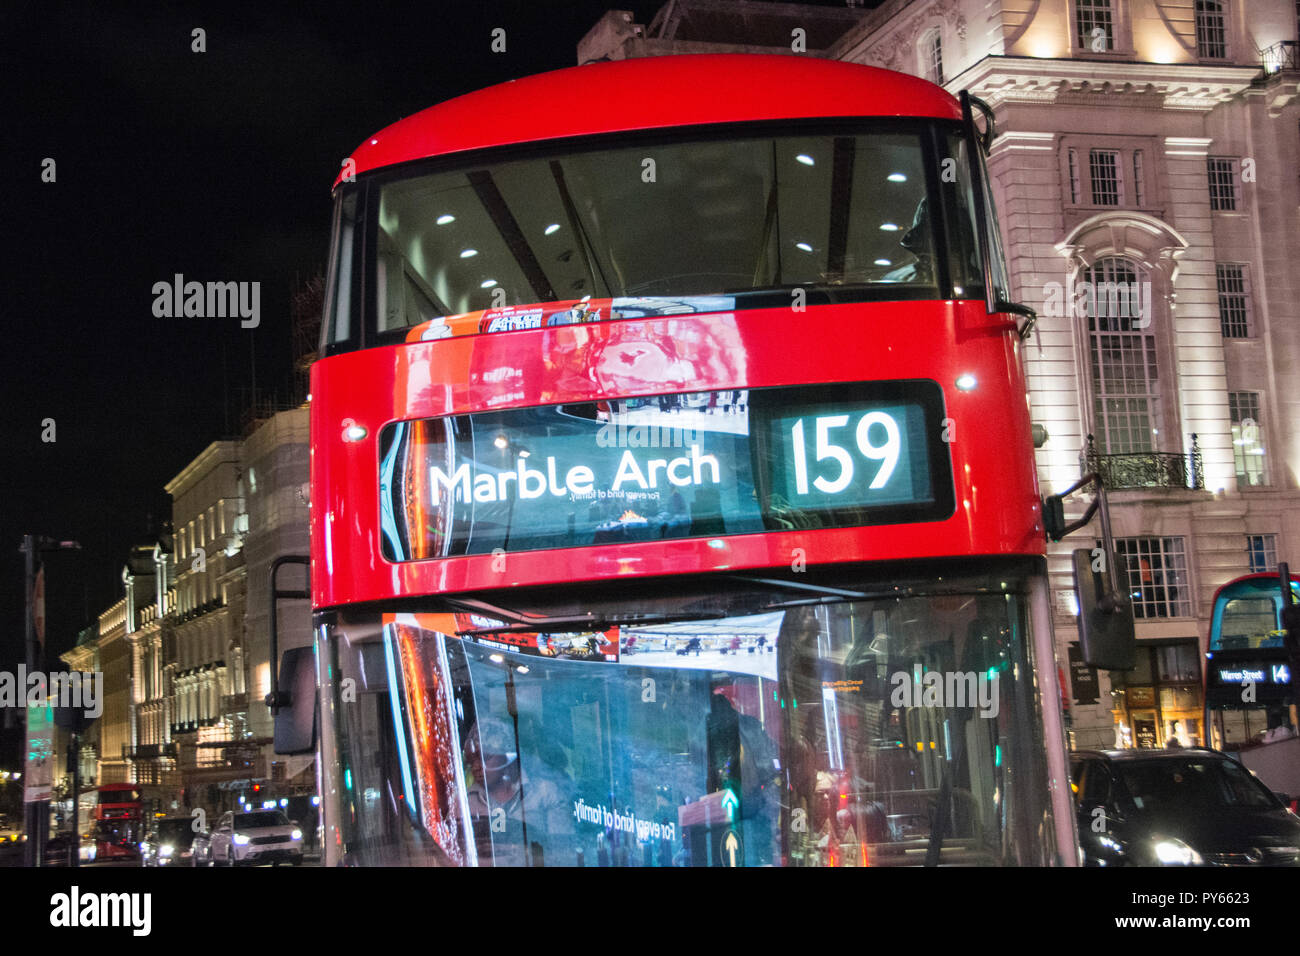 The New TFL Routmaster or New Bus (Boris buses) for London at Piccadilly Circus, London, UK Stock Photo